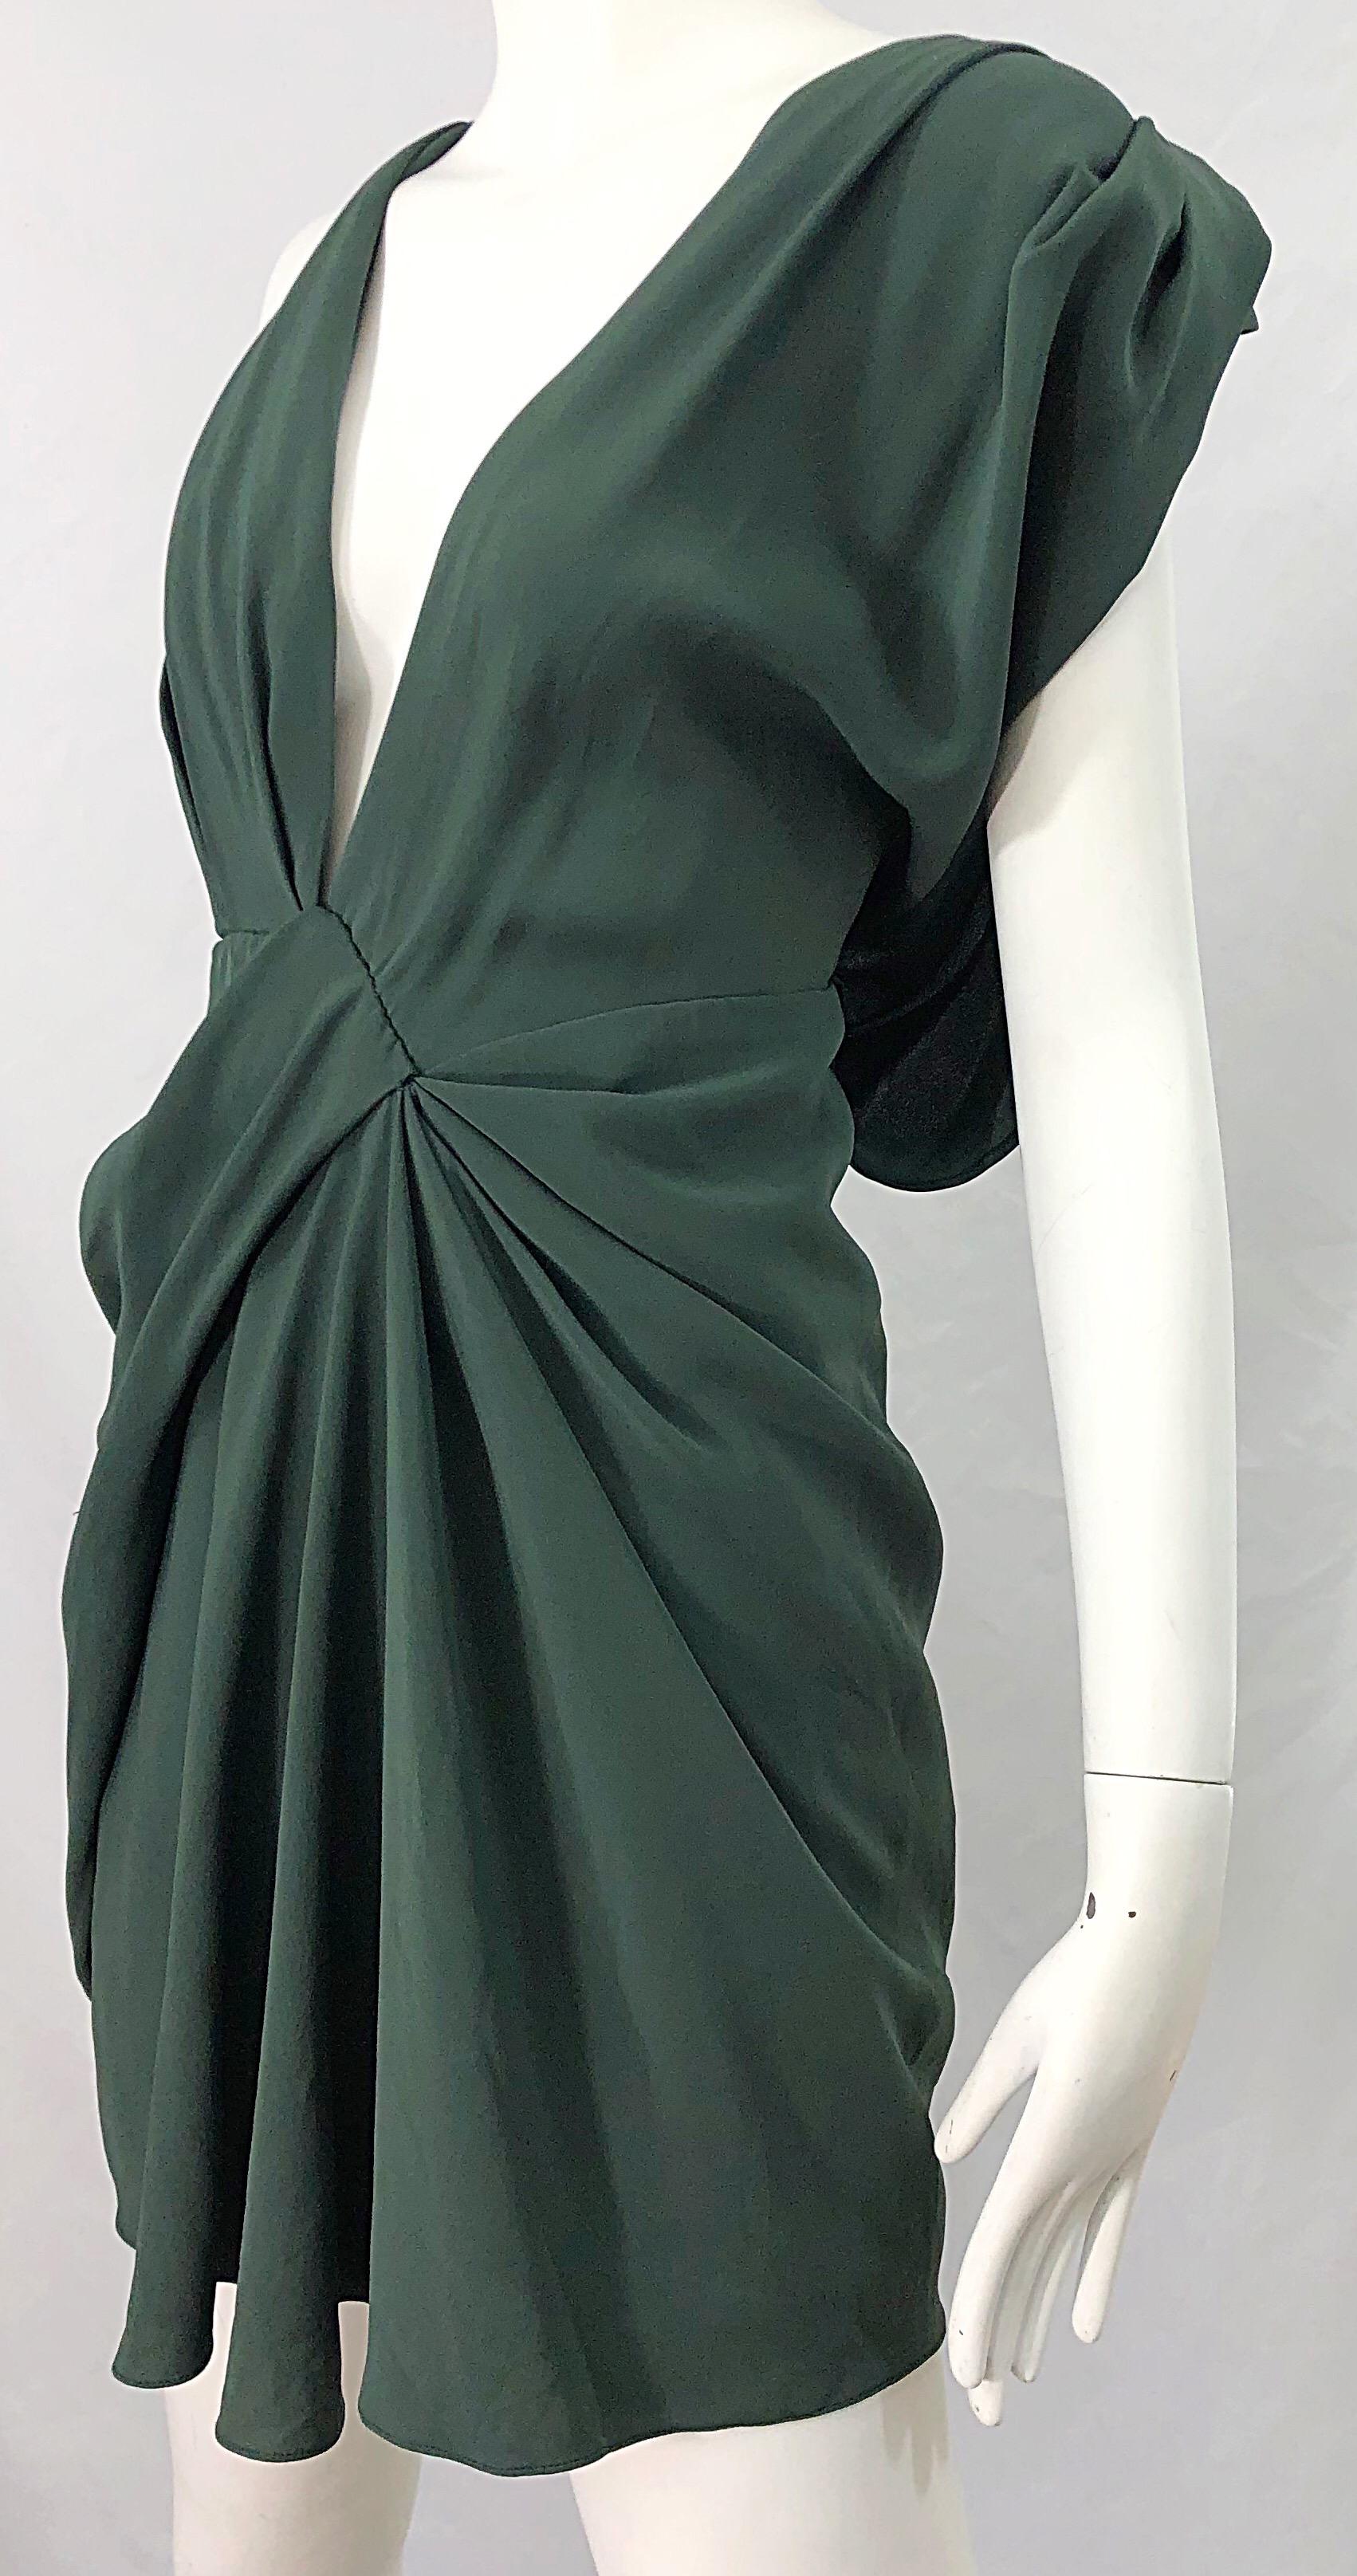 J Mendel Hunter Forest Green Sexy Plunging Early 2000s Asymmetrical Mini Dress For Sale 1